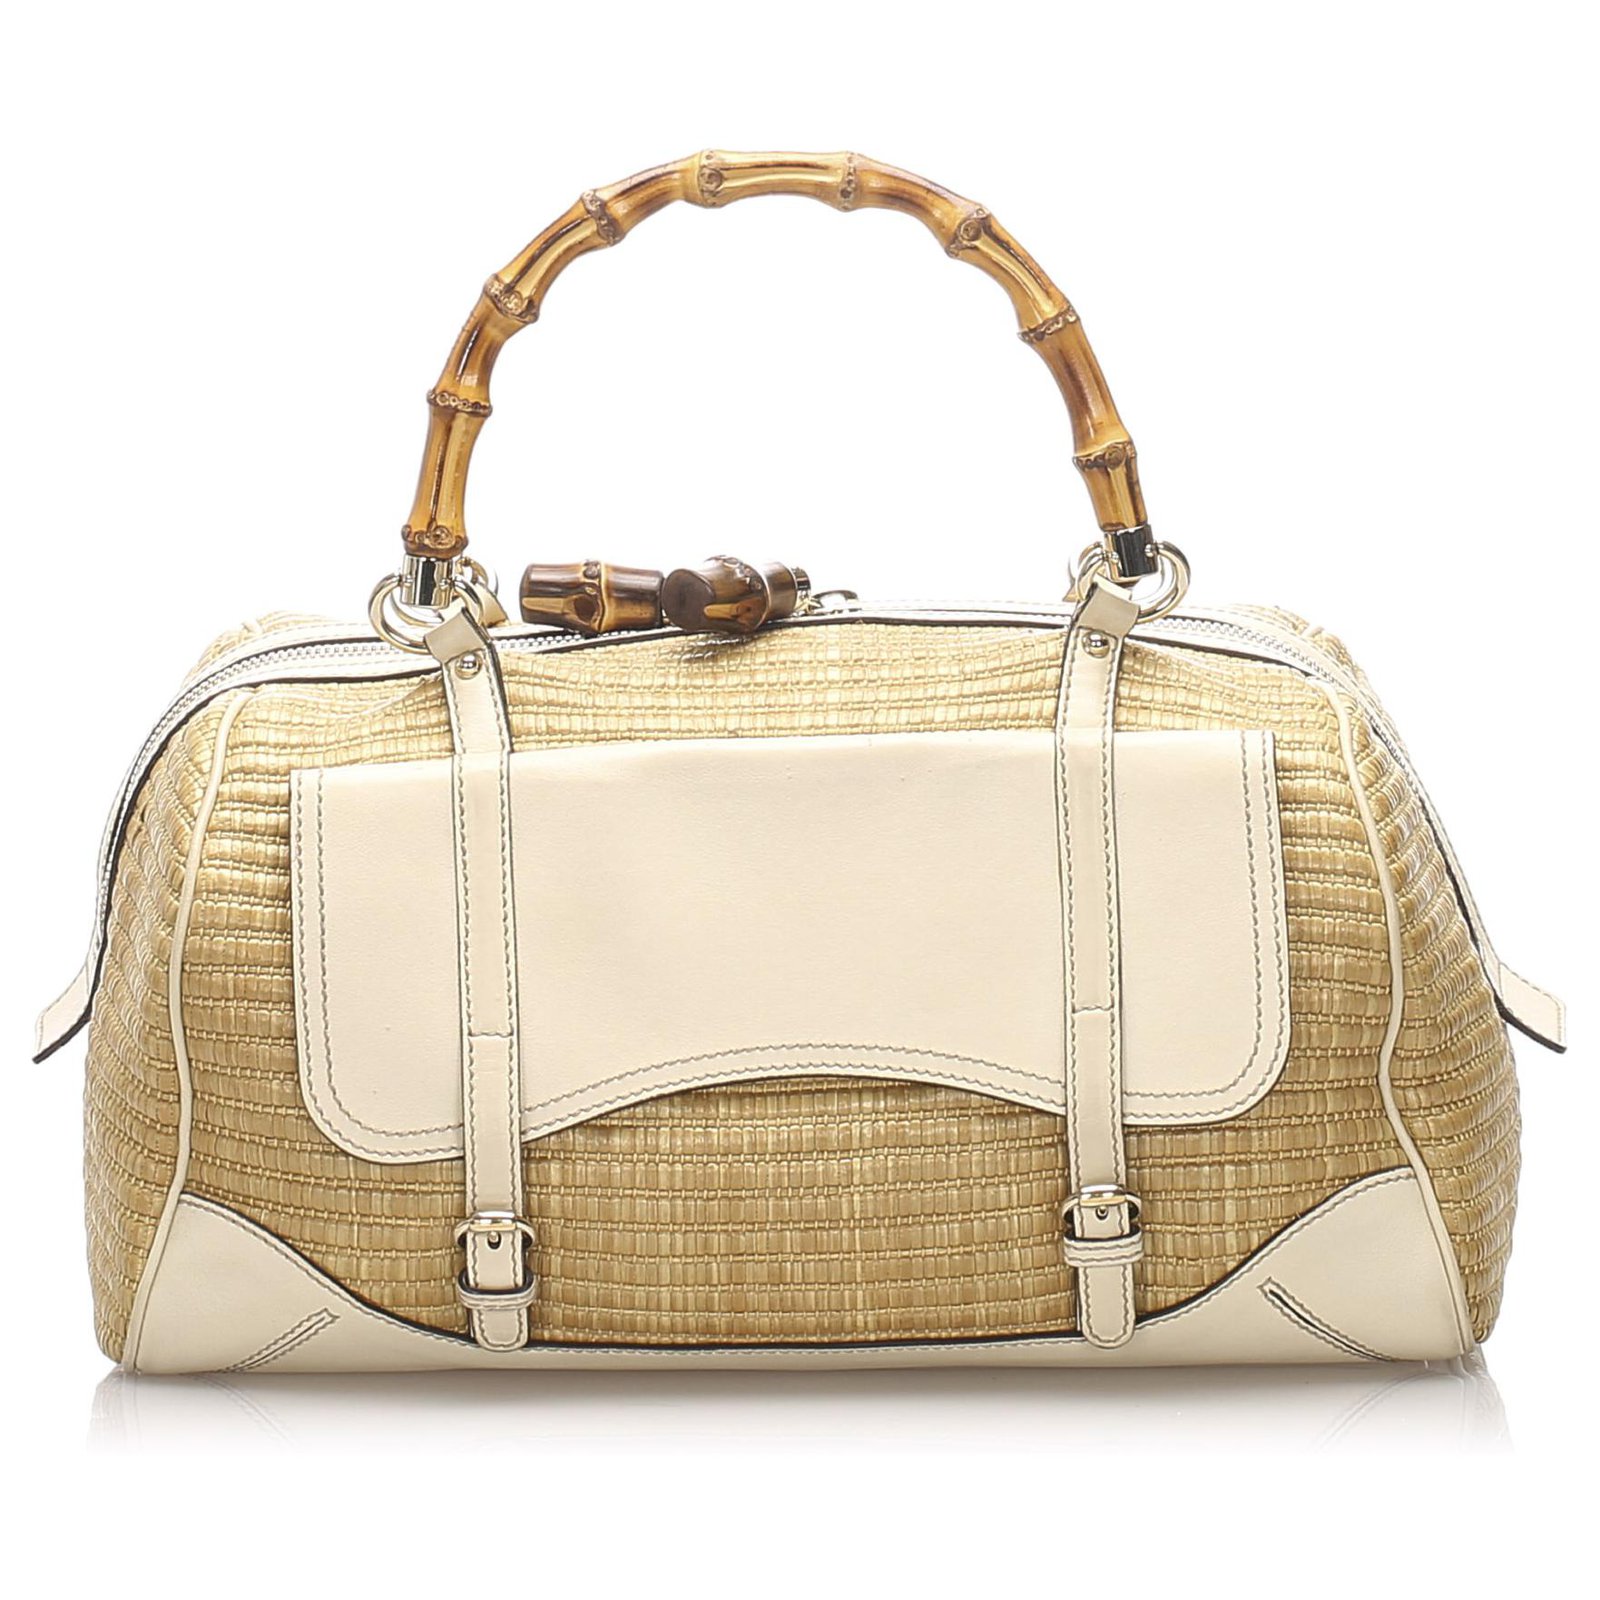 Gucci Brown Bamboo Straw Handbag White Beige Leather Pony-style